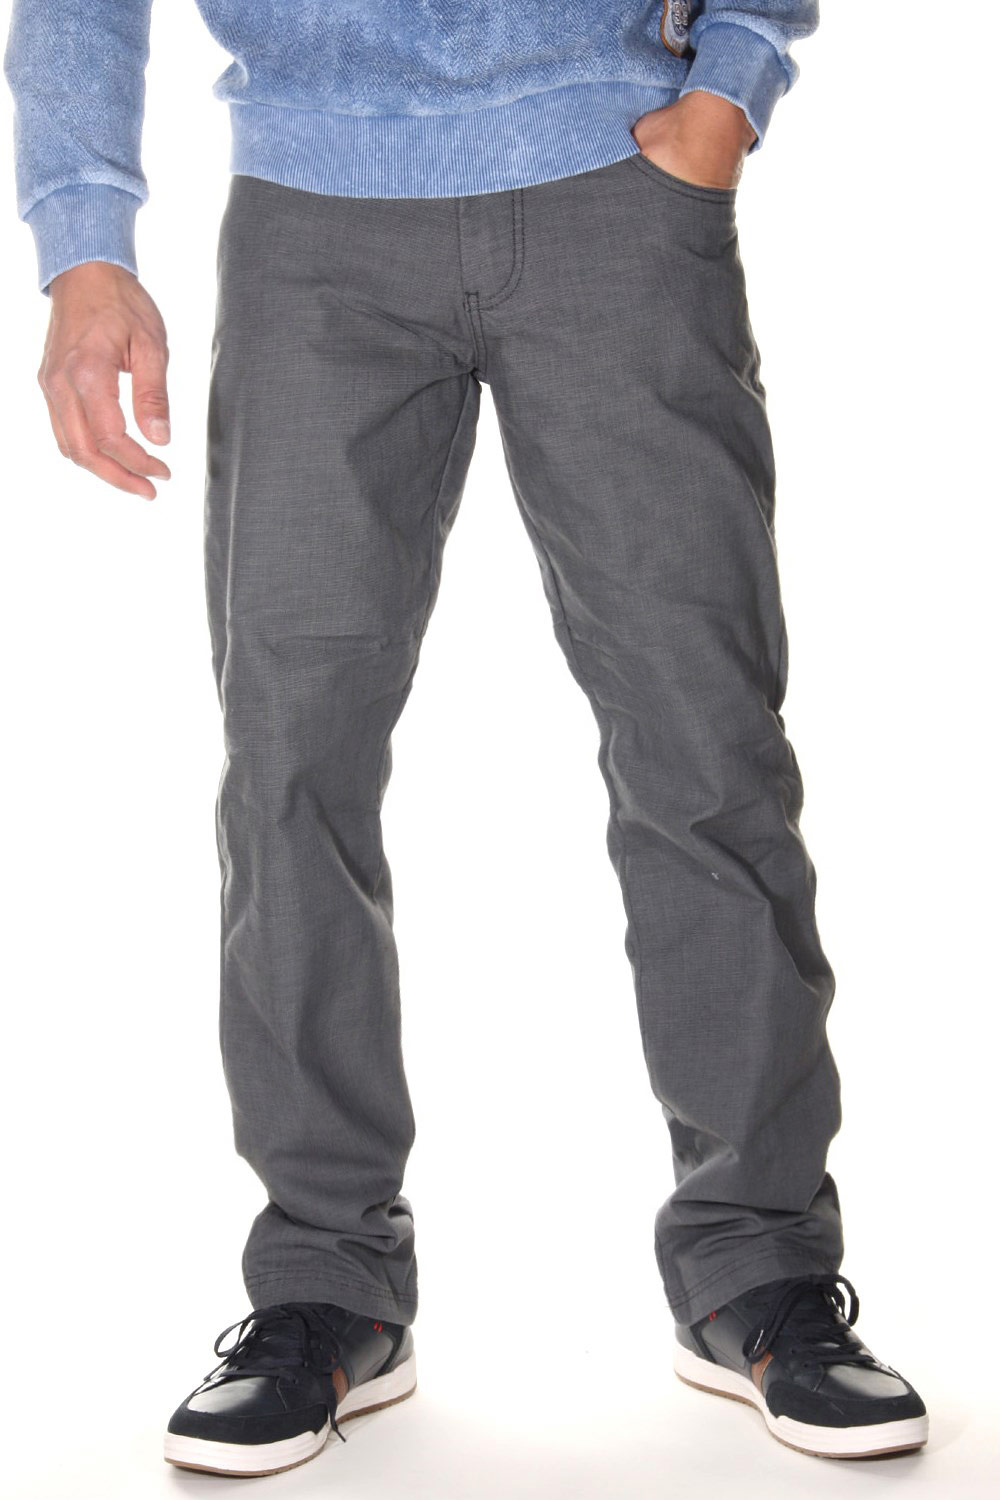 ICE BOYS trousers at oboy.com